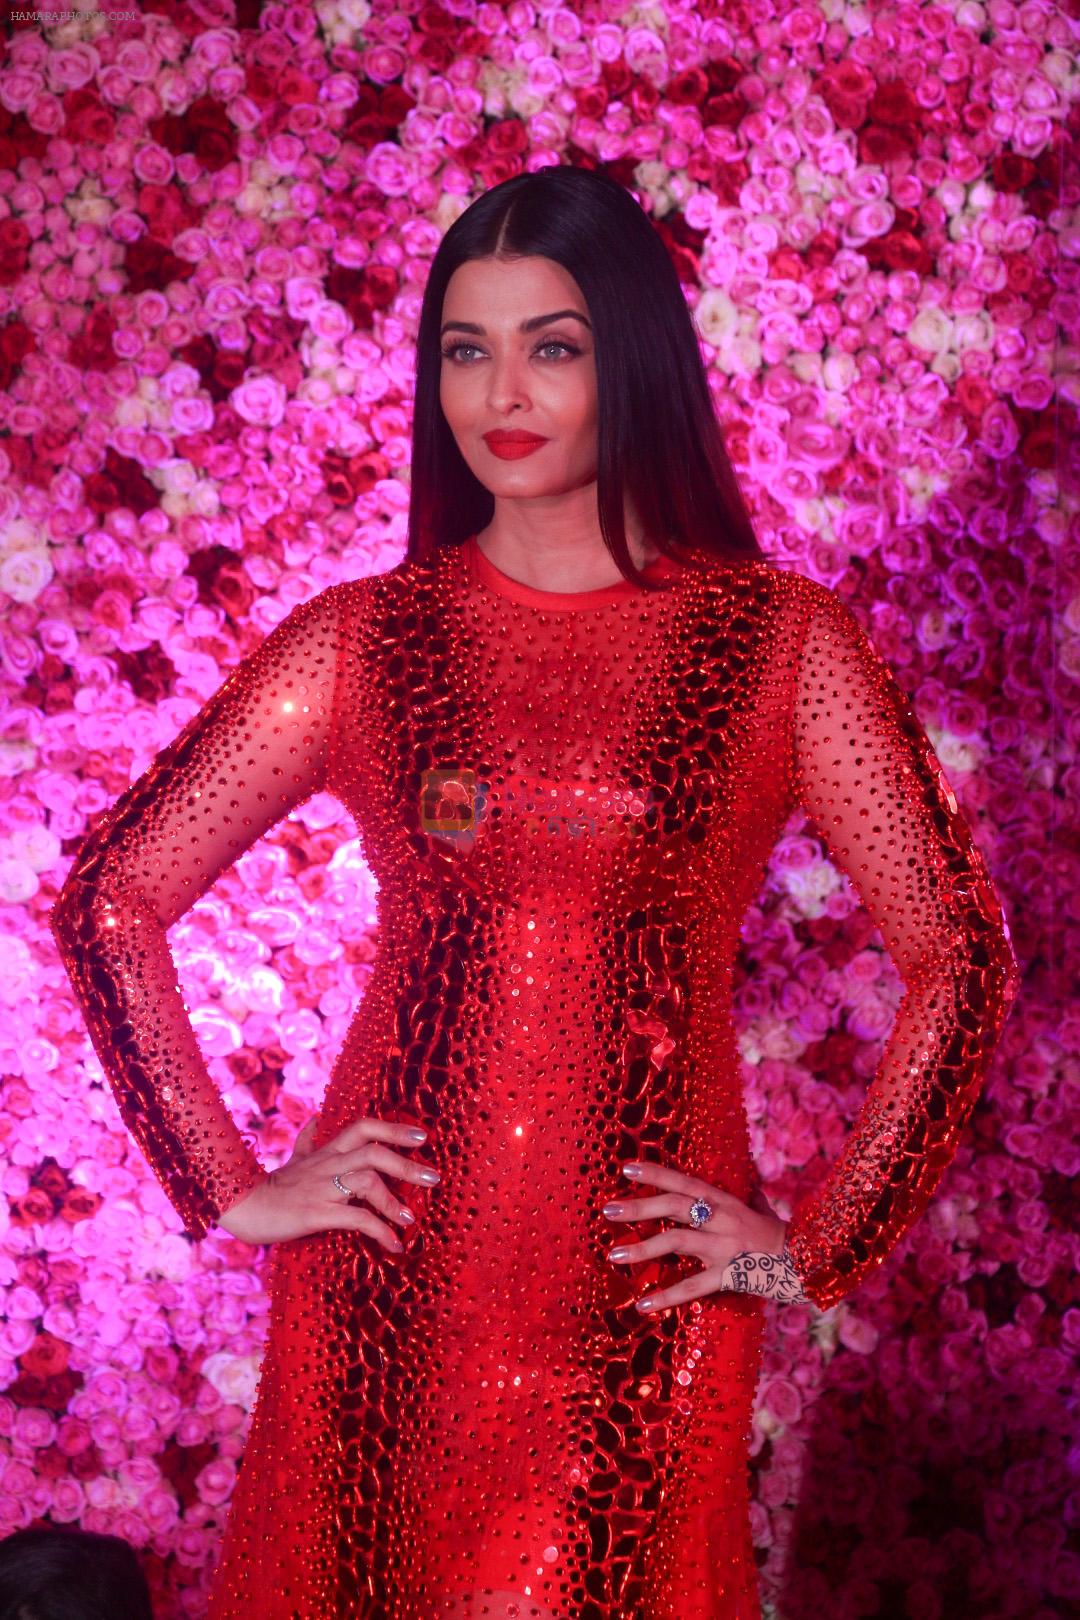 Aishwarta Rai Bachchan at the Red Carpet of Lux Golden Rose Awards 2018 on 18th Nov 2018